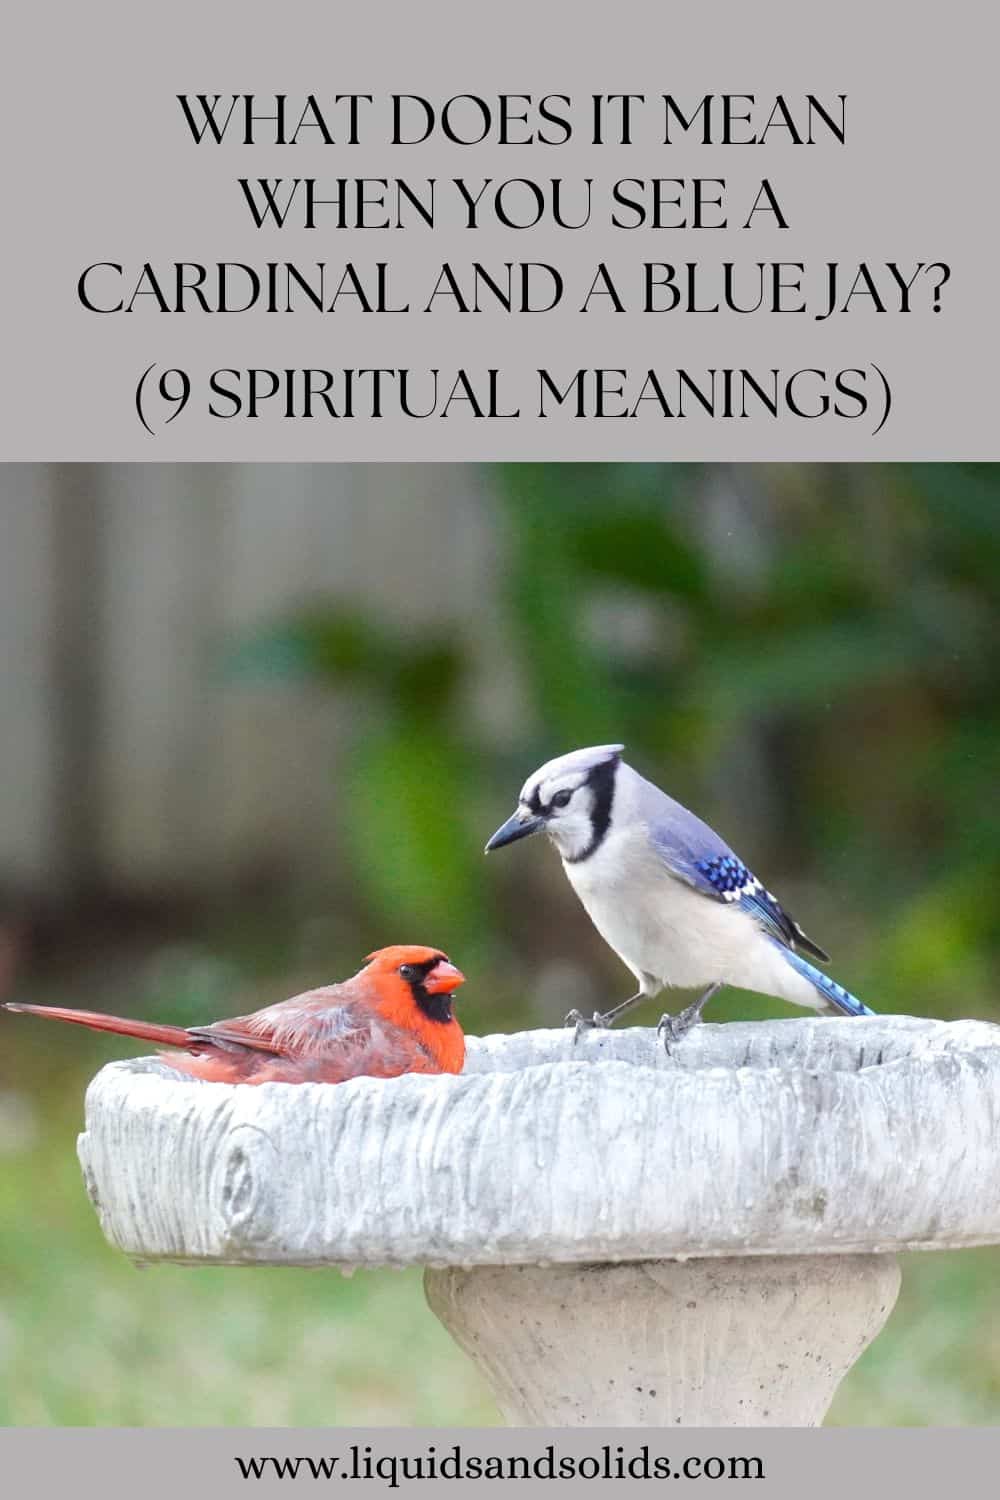 What Does It Mean When You See A Cardinal And A Blue Jay? (9 Spiritual Meanings)